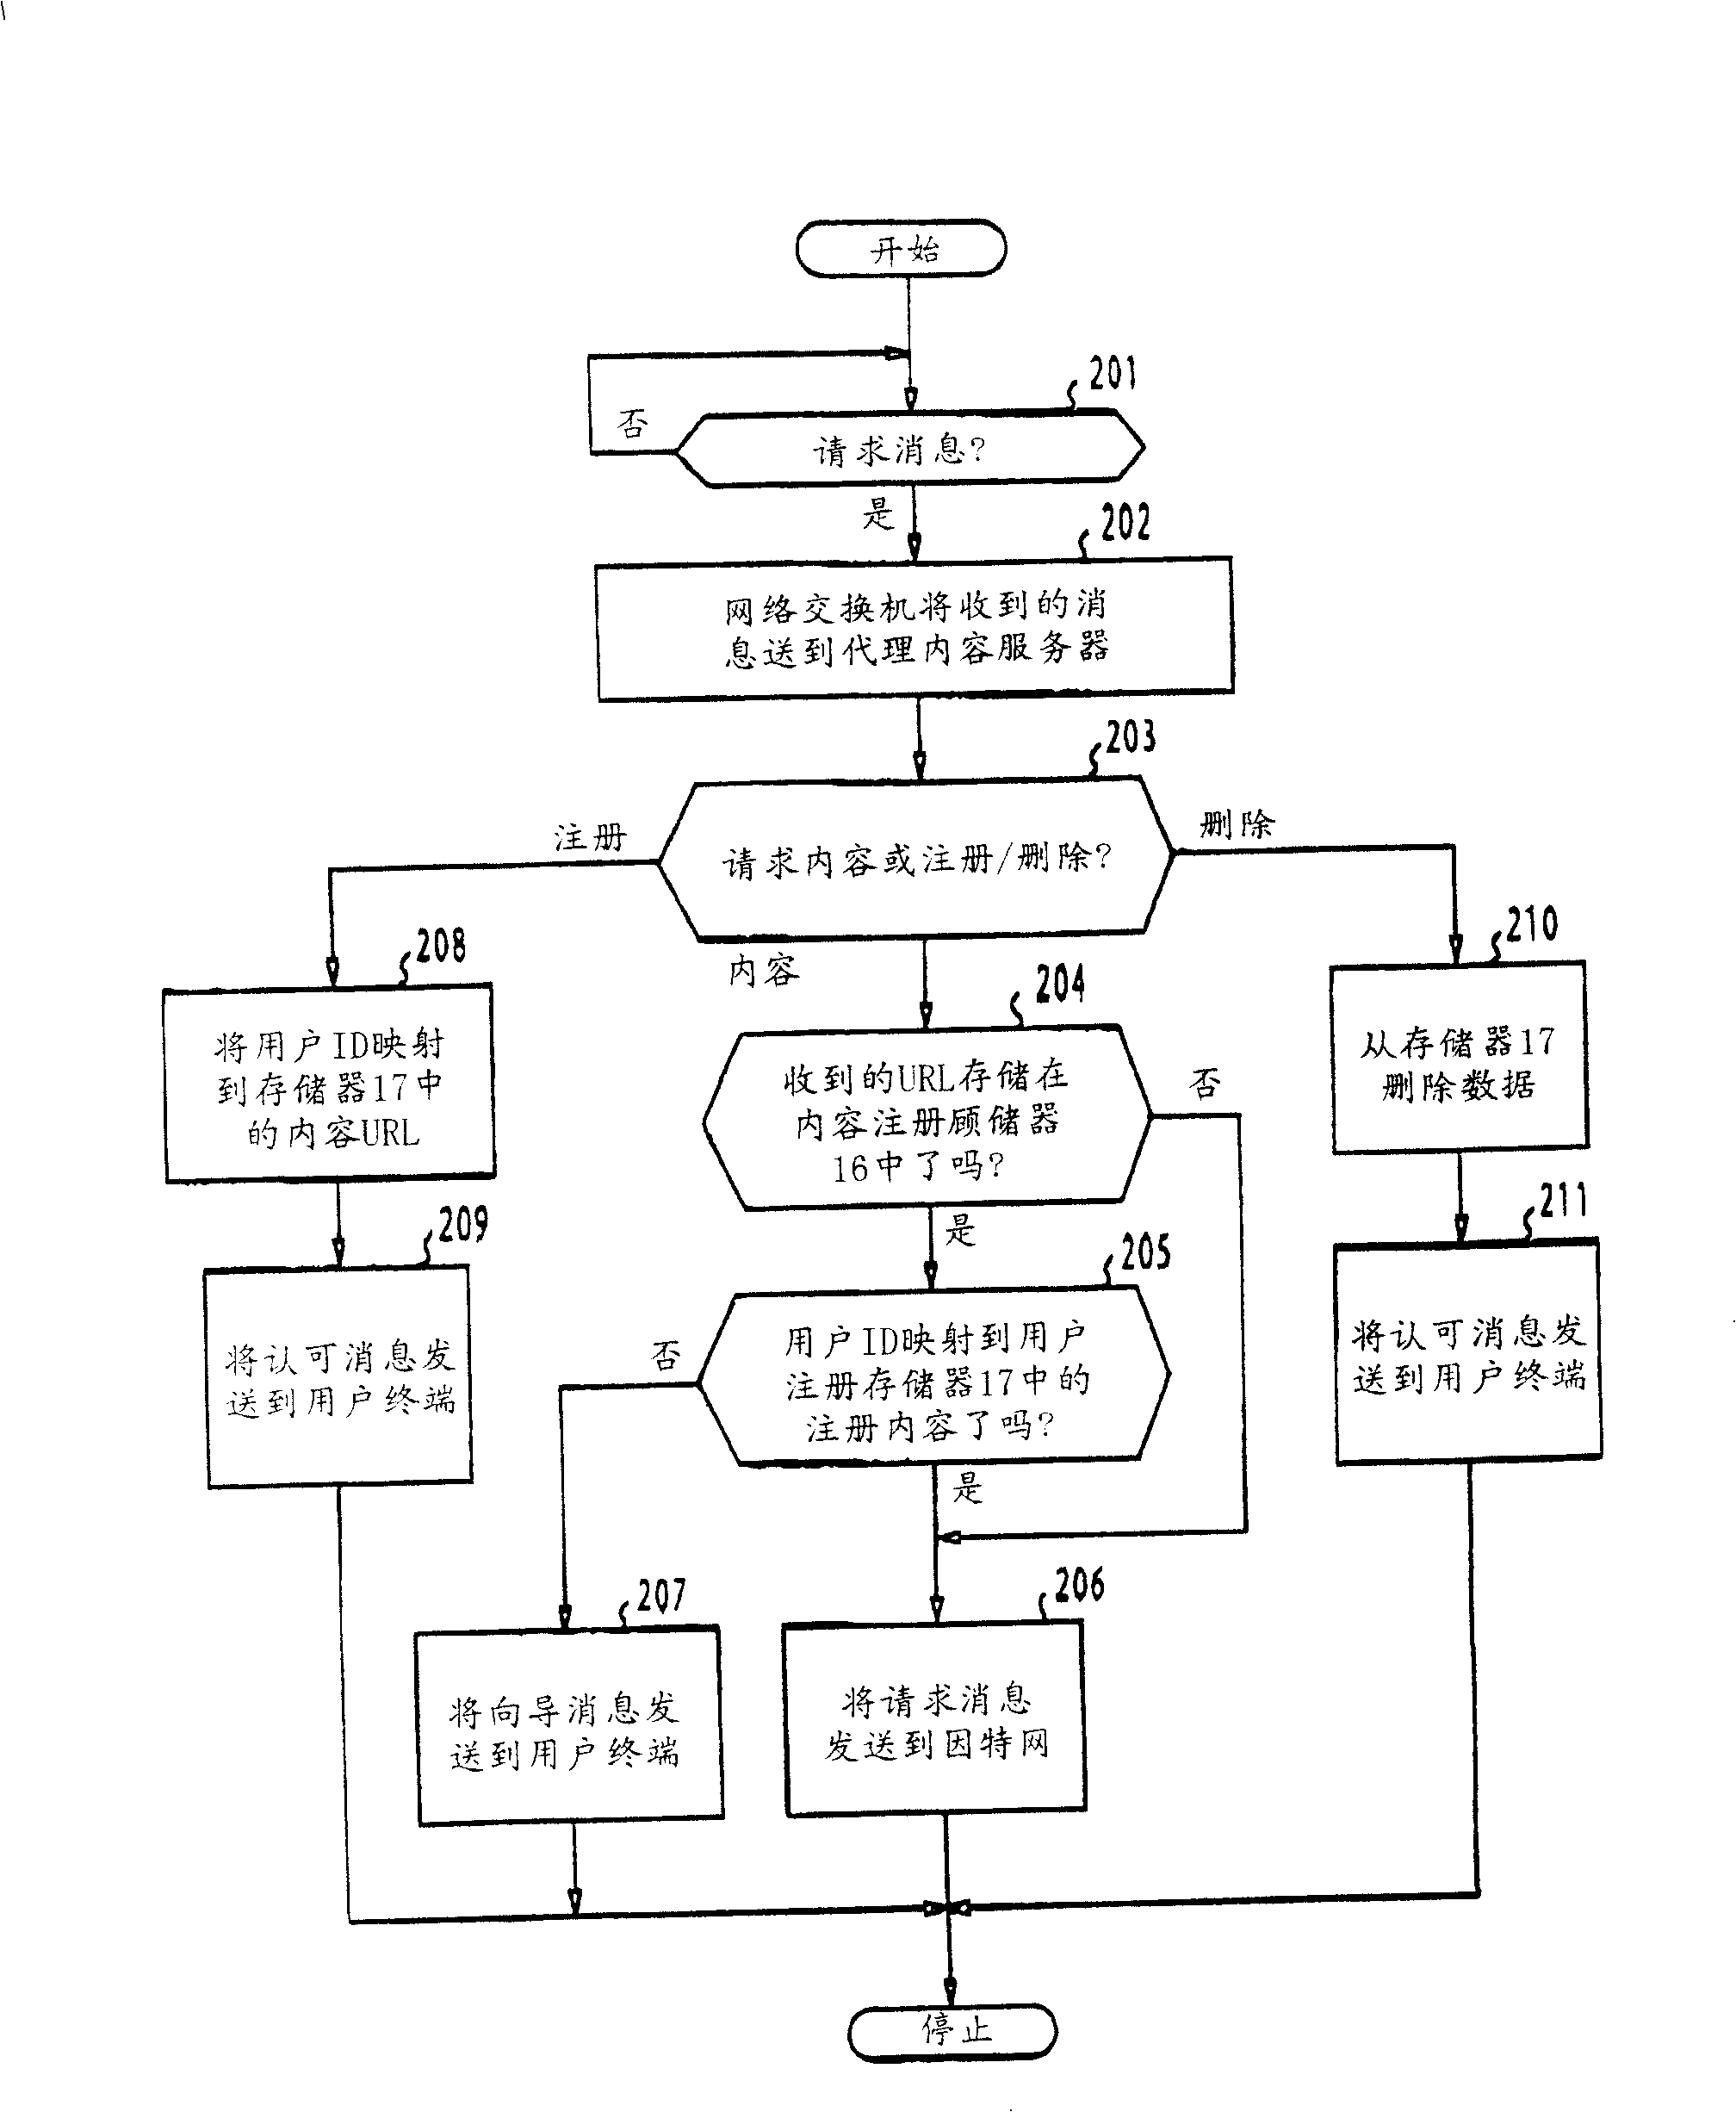 Content transmitting system using agent content service device